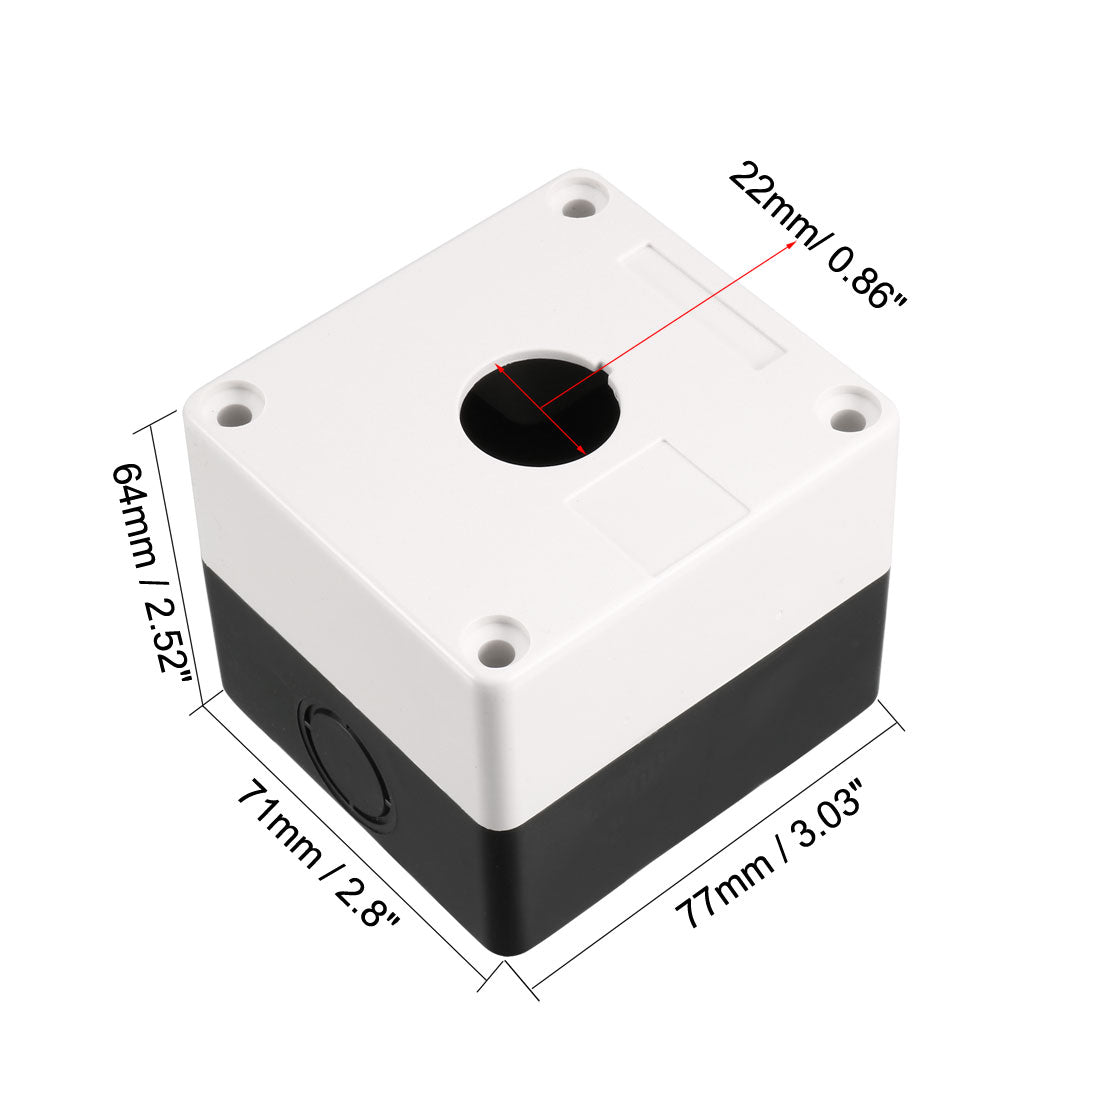 uxcell Uxcell Push Button Switch Control Station Box 22mm 1 Button Hole Waterproof IP65 White and Black